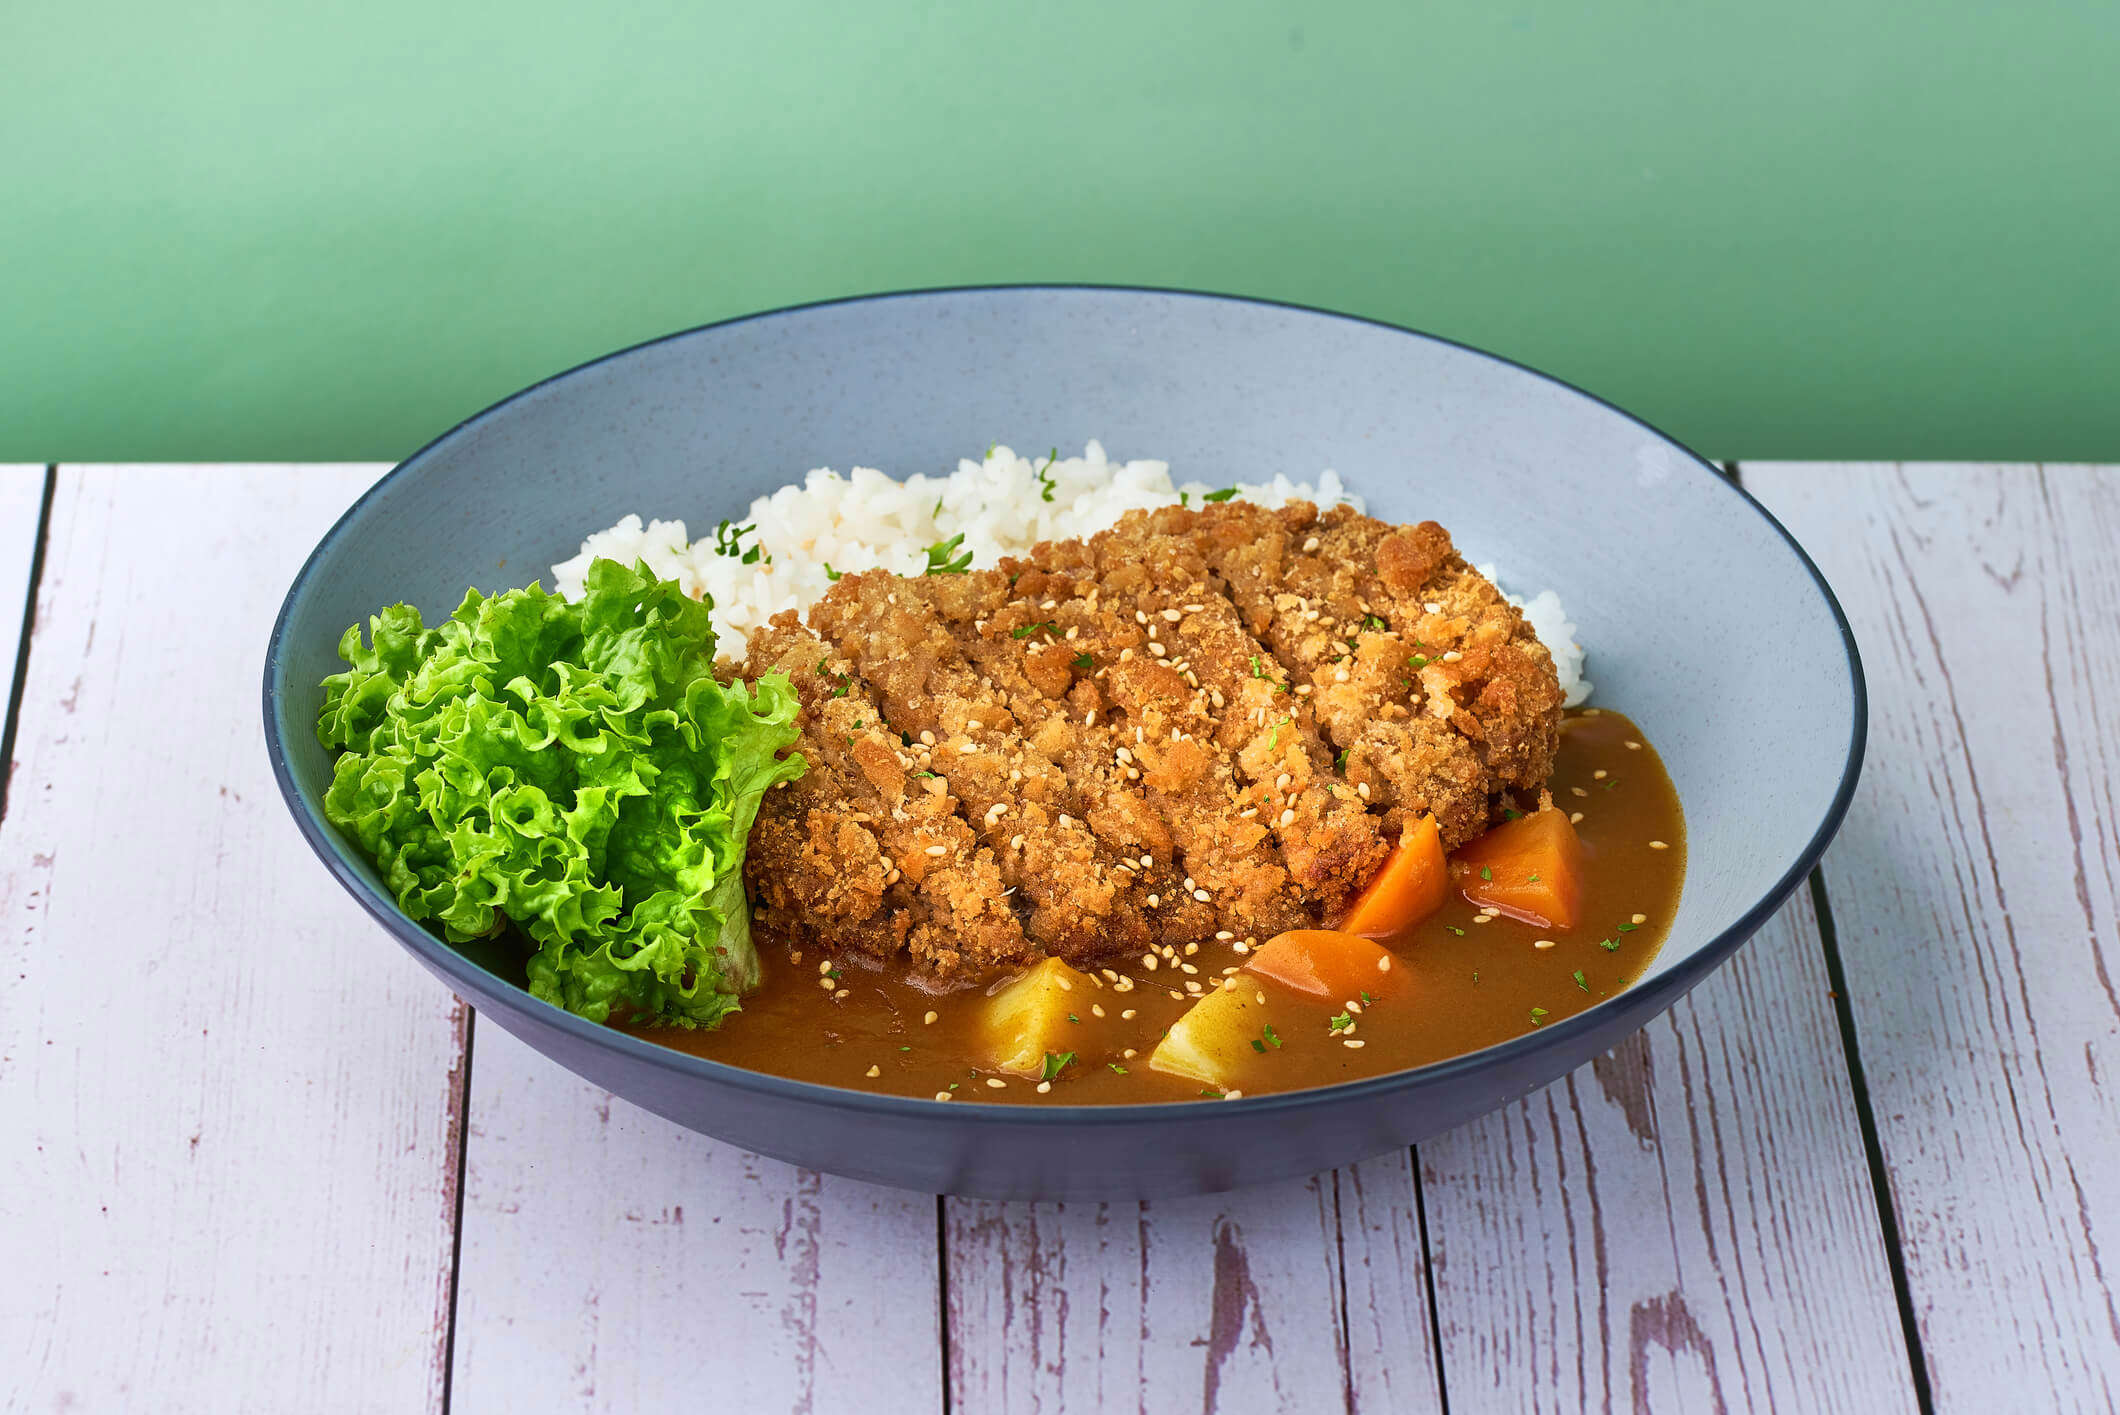 Chicken katsu curry with white rice and leafy greens in a blue bowl on a green background